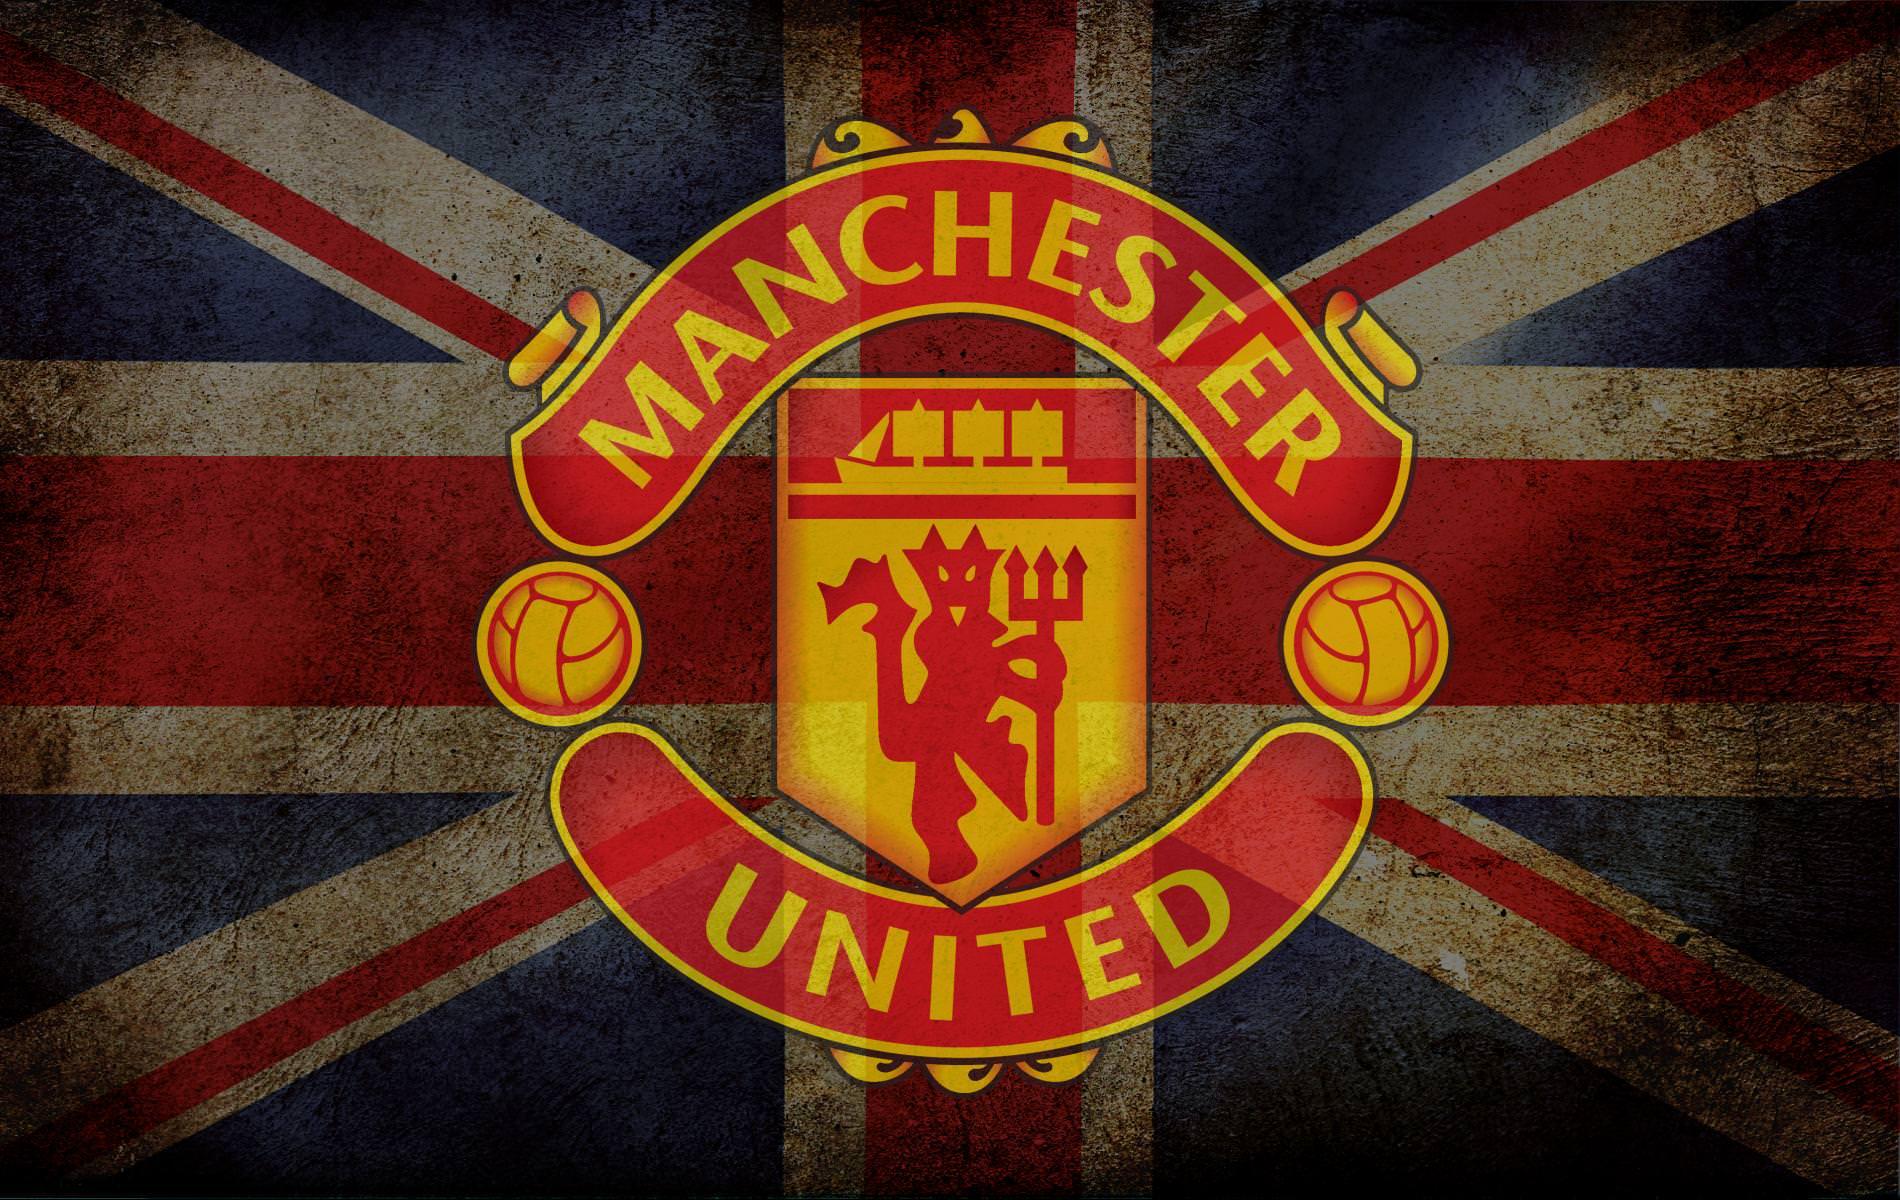 Manchester United In Flag English Wallpaper HD Wallpaper. High